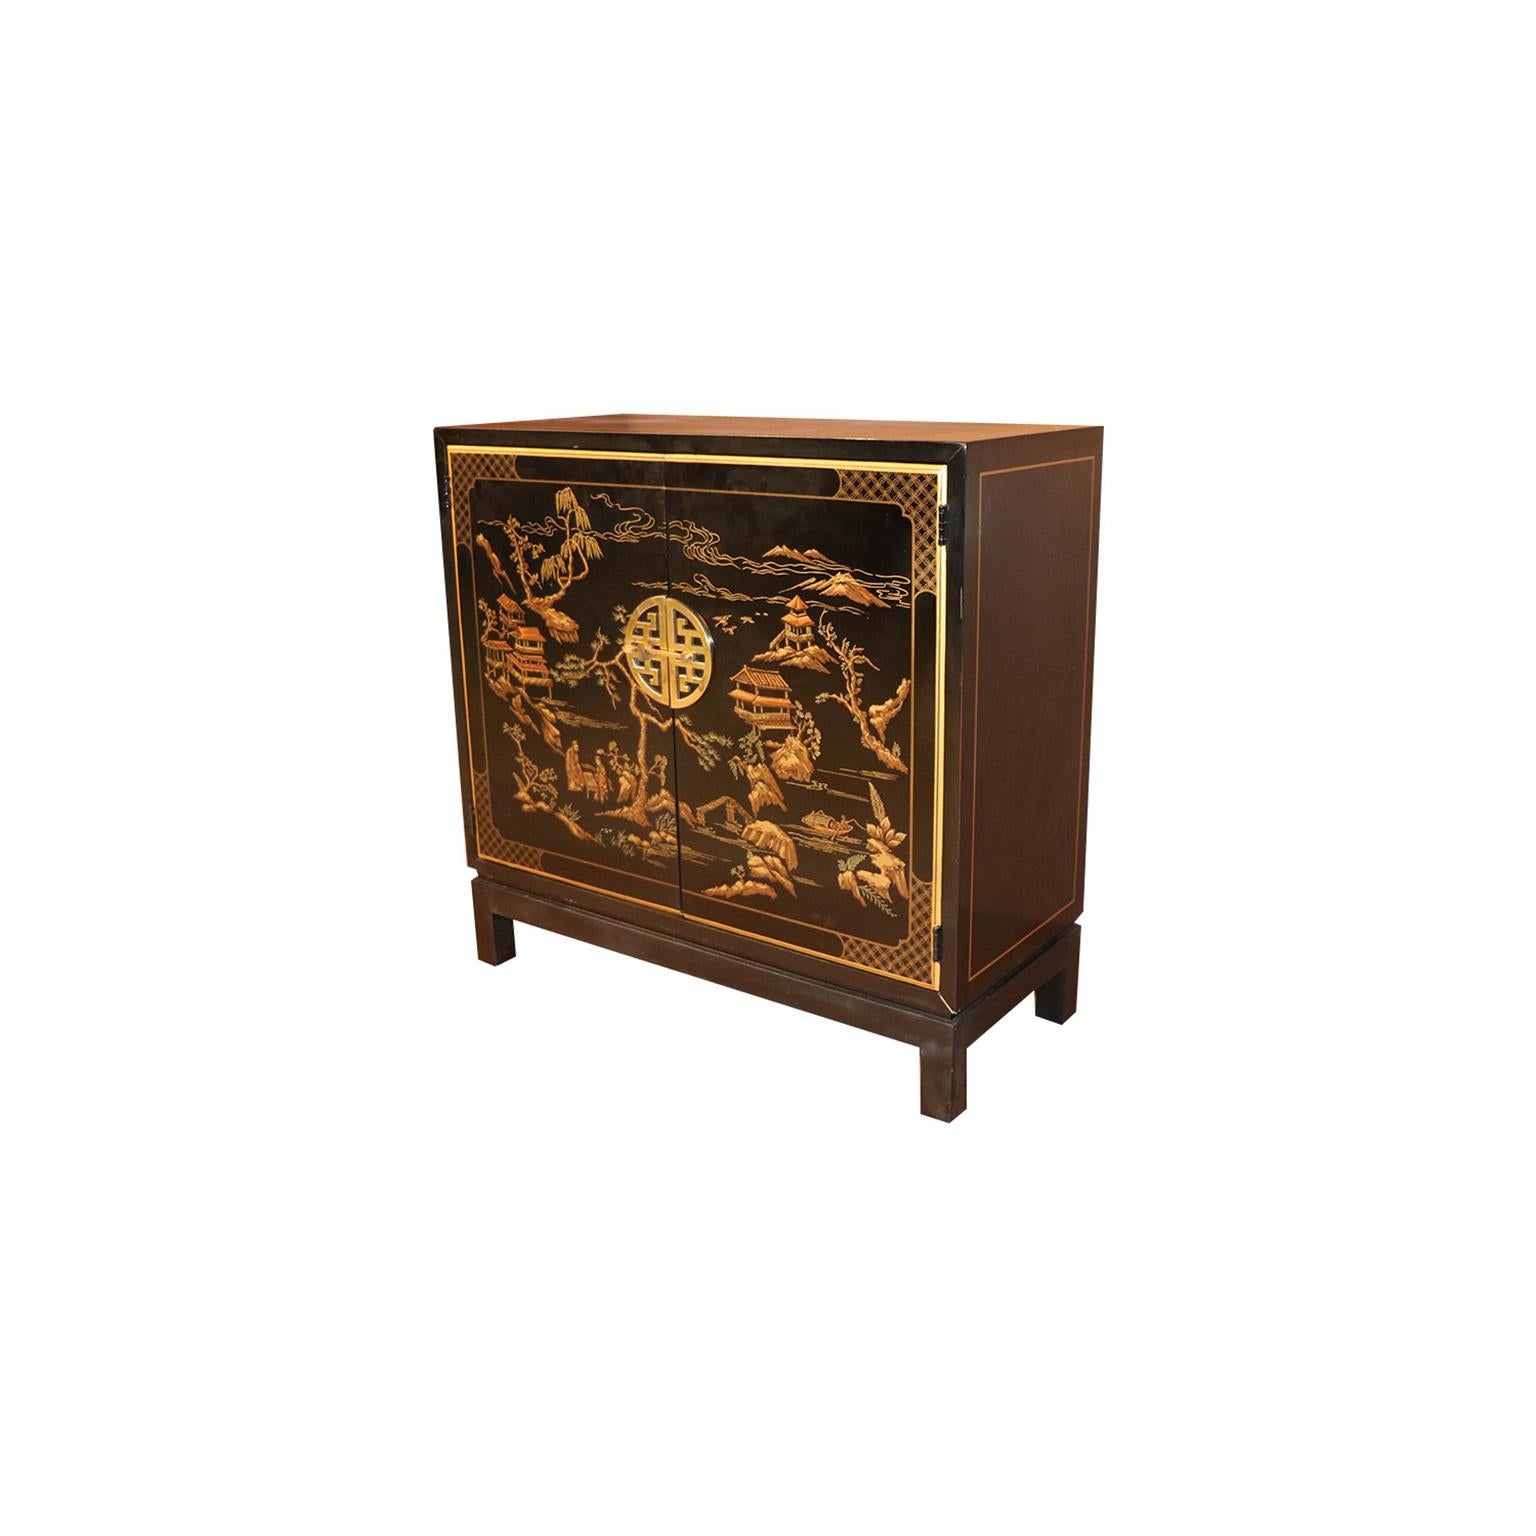 Gorgeous black lacquer, elegant Asian, chinoiserie style two- door cabinet, circa 1980s. This cabinet is part of the Et Cetera collection by Drexel. Features rectangular top, above double cabinet doors fitted with polished brass round Chinese style